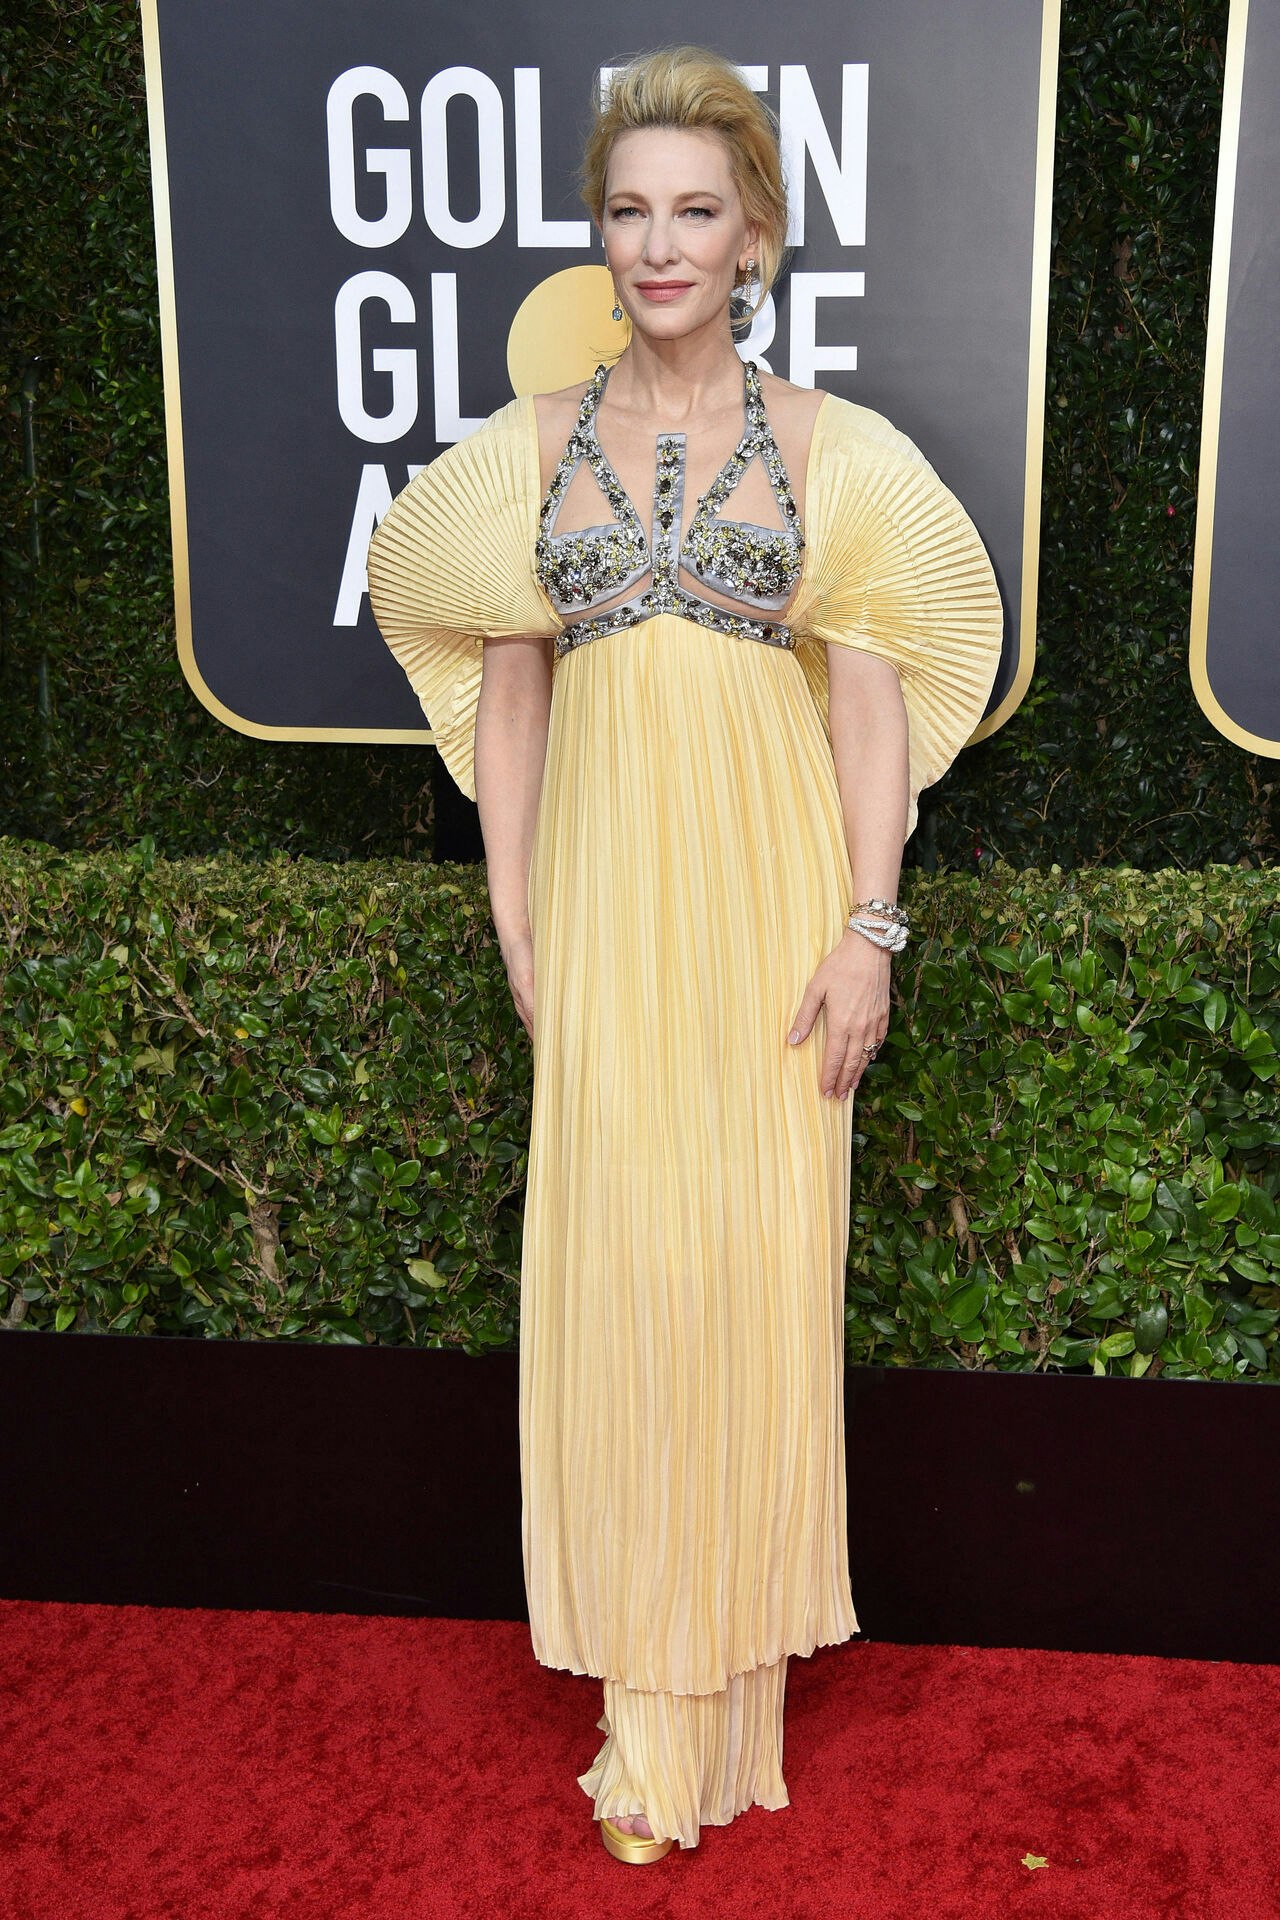 Cate Blanchett attending the 77th Golden Globe Awards Arrivals at The Beverly Hilton, Los Angeles, CA, USA on January 5, 2020.